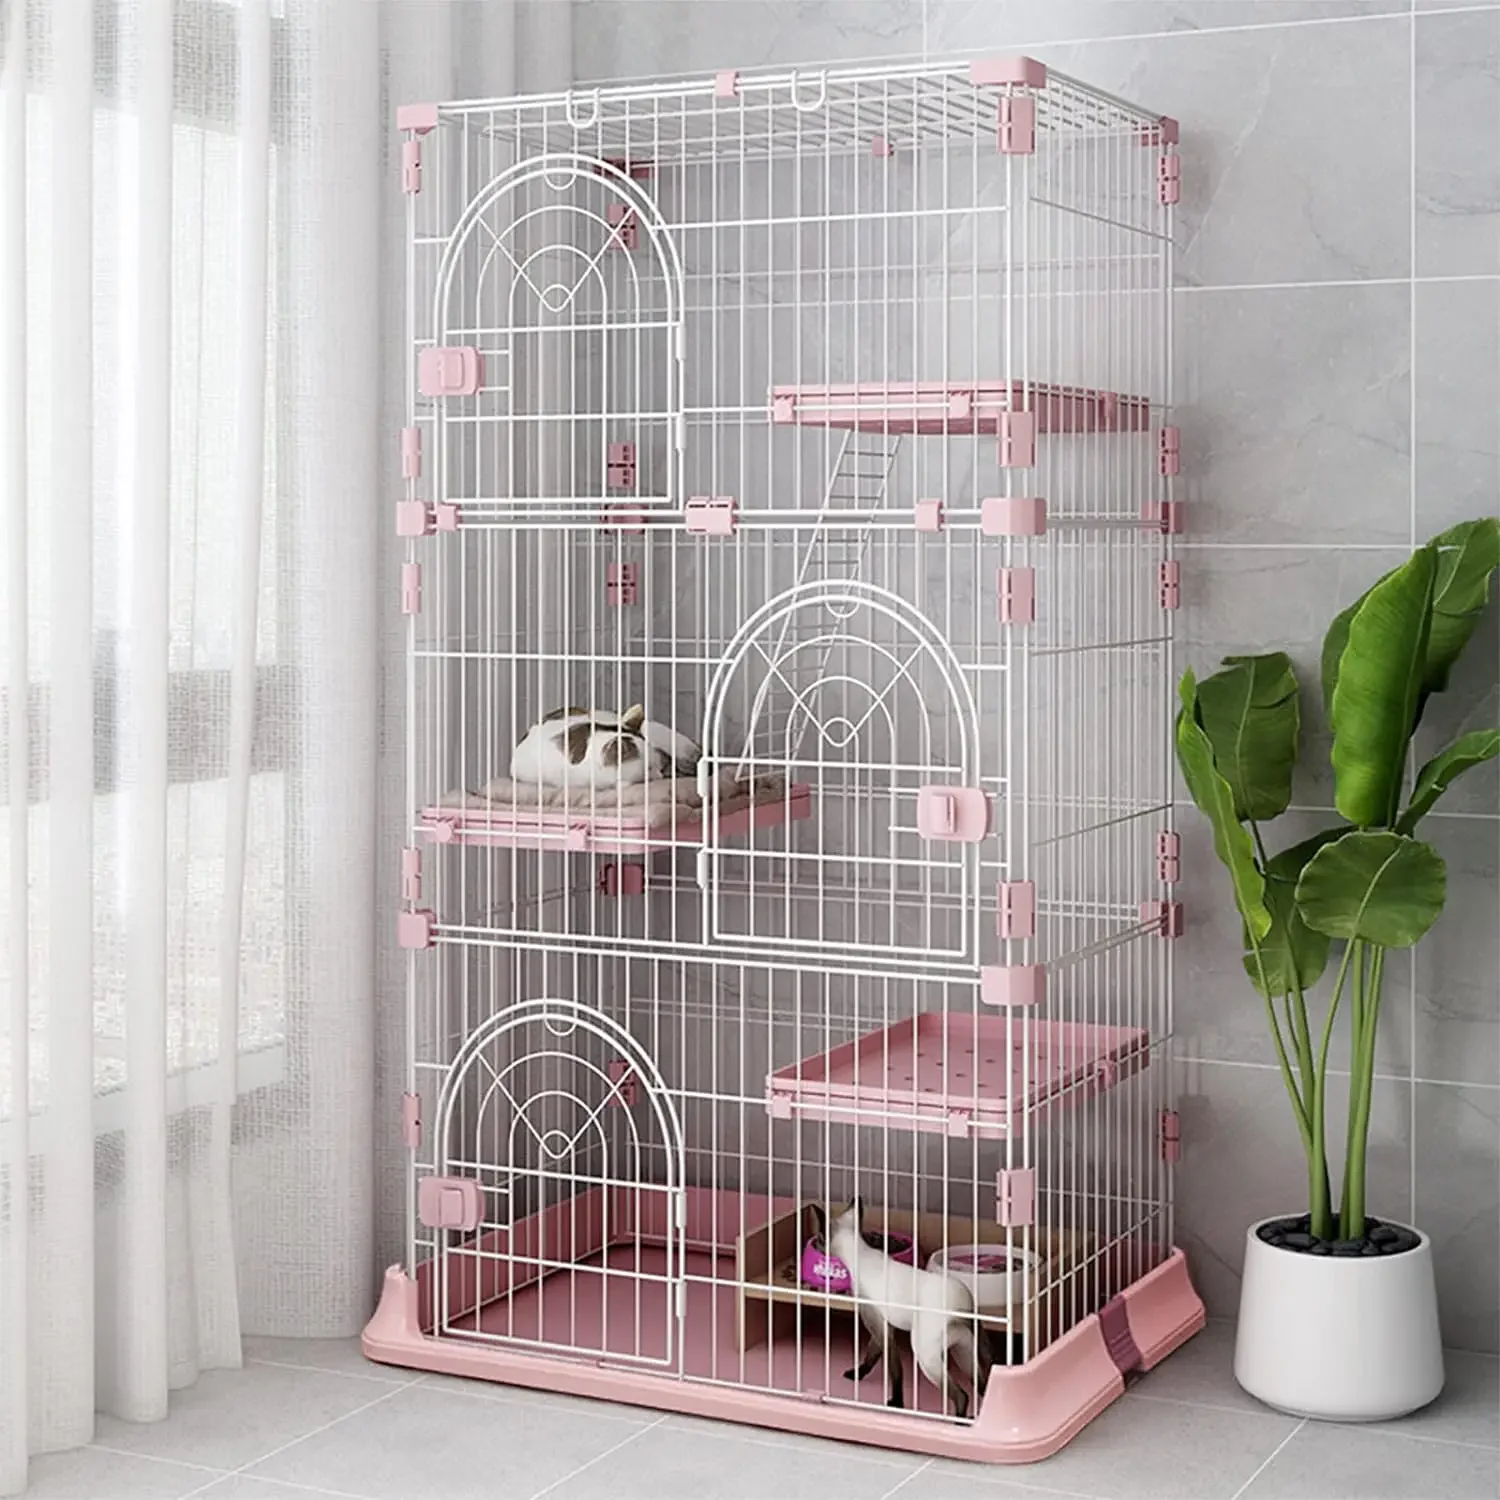 

4-Tier Wire Cat Cage Playpen Kennel, Cat Catios Large Space 30 x 20 x 52.5 Inches for 1-3 Cats, Pink Cat Crate with 3 Platforms